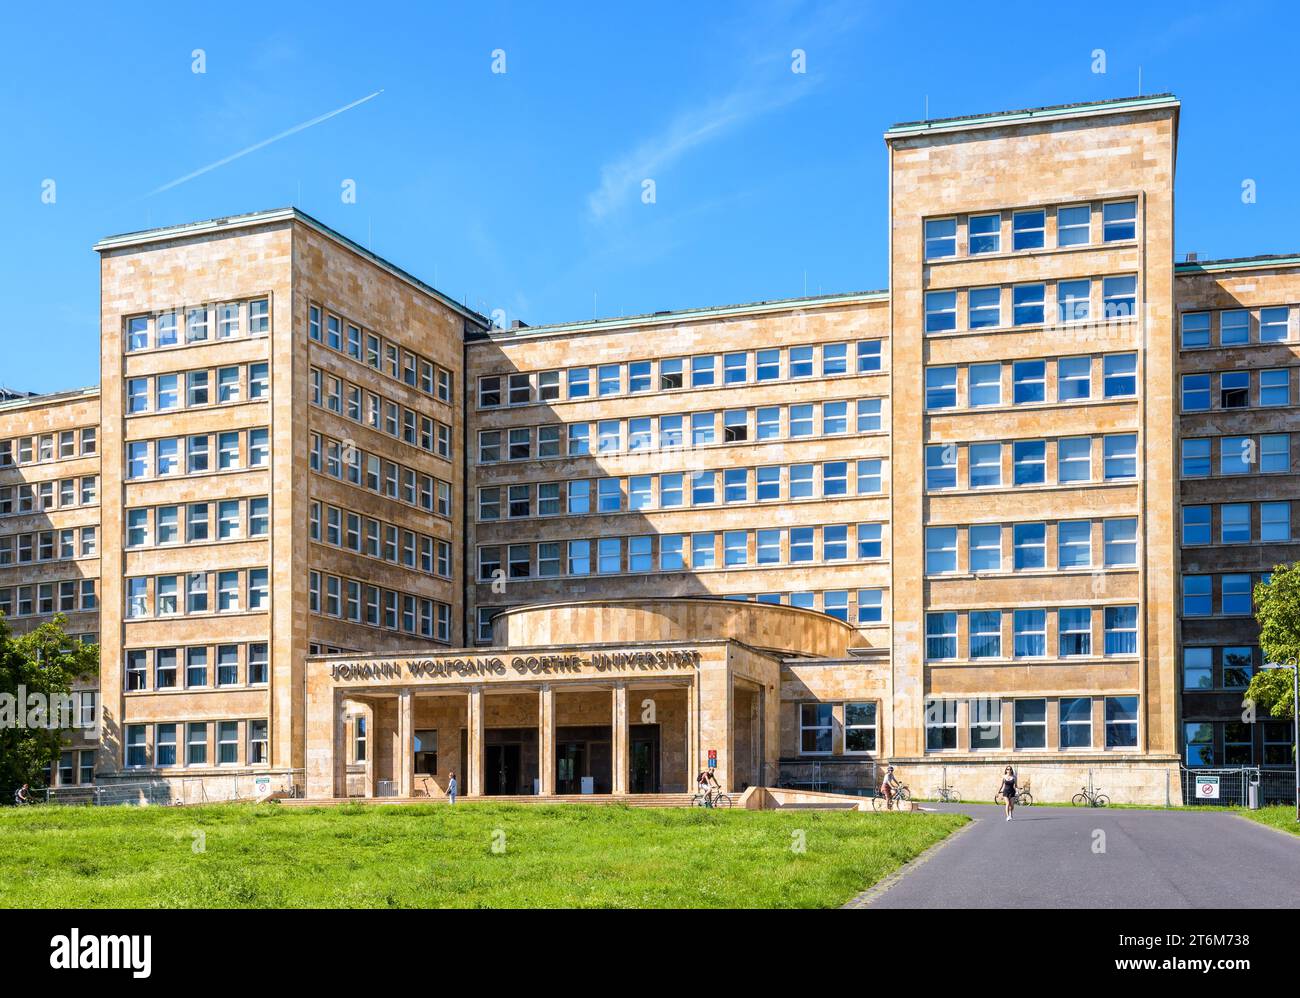 Main entrance of the IG Farben Building in Frankfurt am Main, Germany, home to the Westend campus of the Goethe University Frankfurt since 2001. Stock Photo